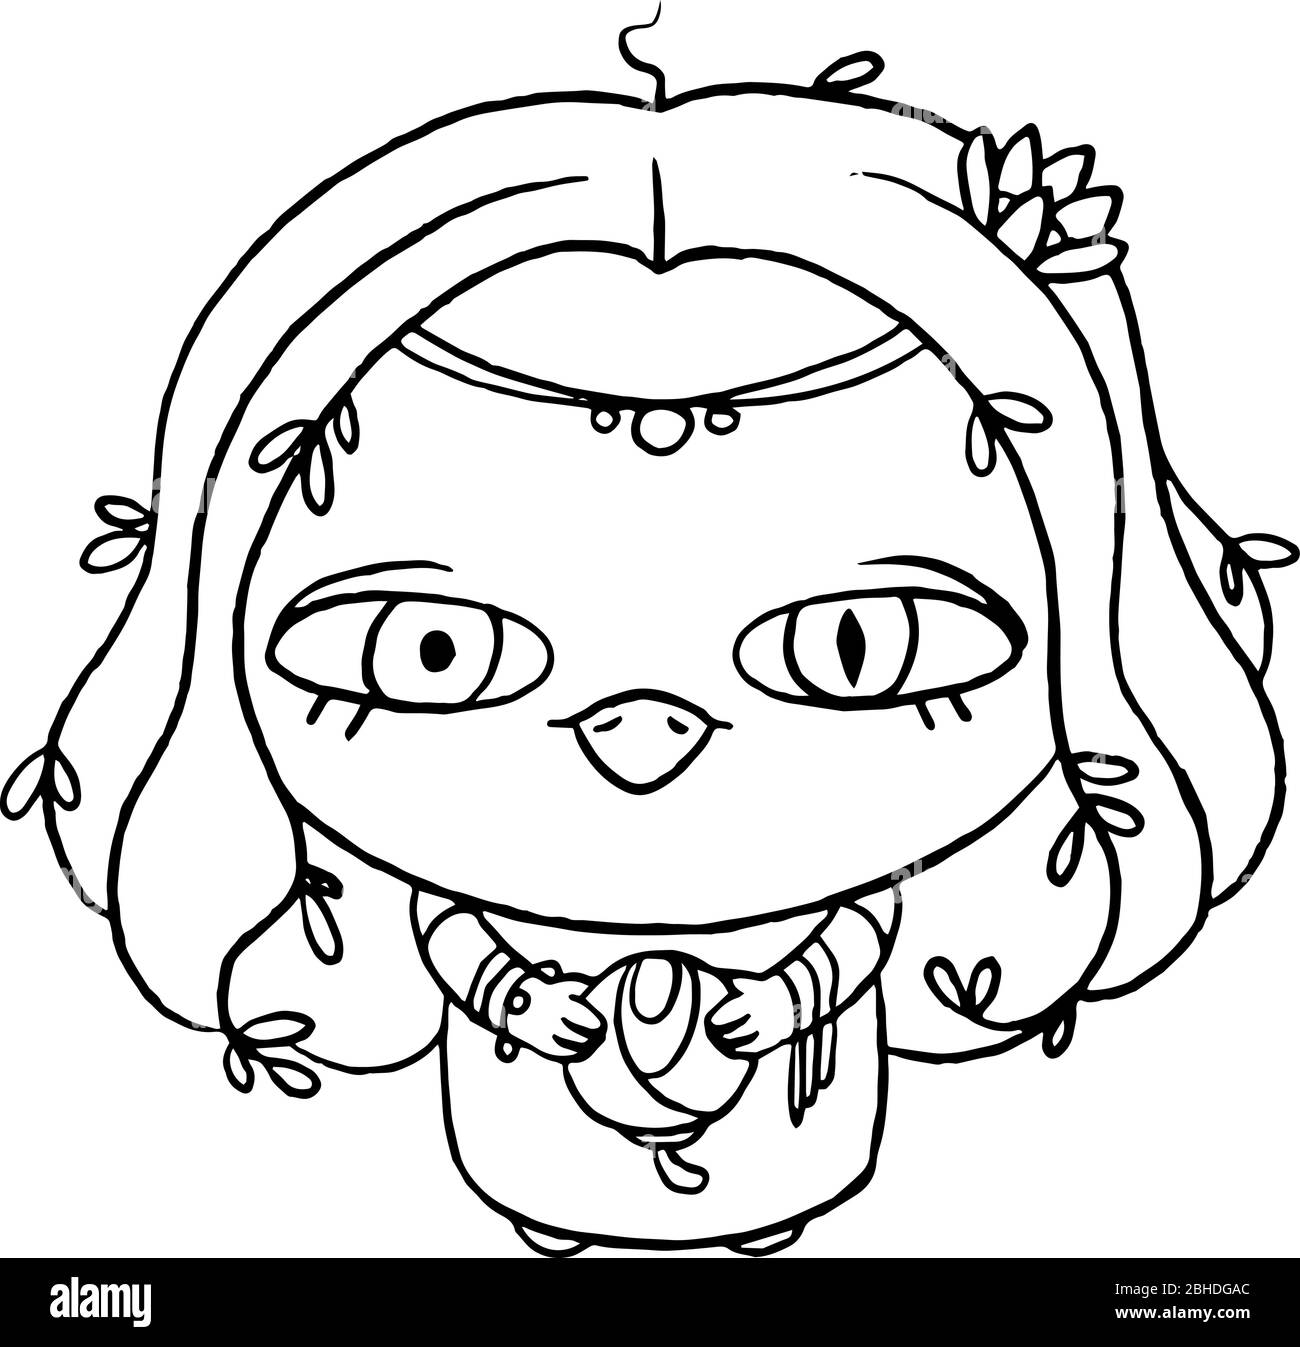 Little hand drawn fairy character. Vector outline illustration of magic creature from fantasy world. Coloring book page. Stock Vector